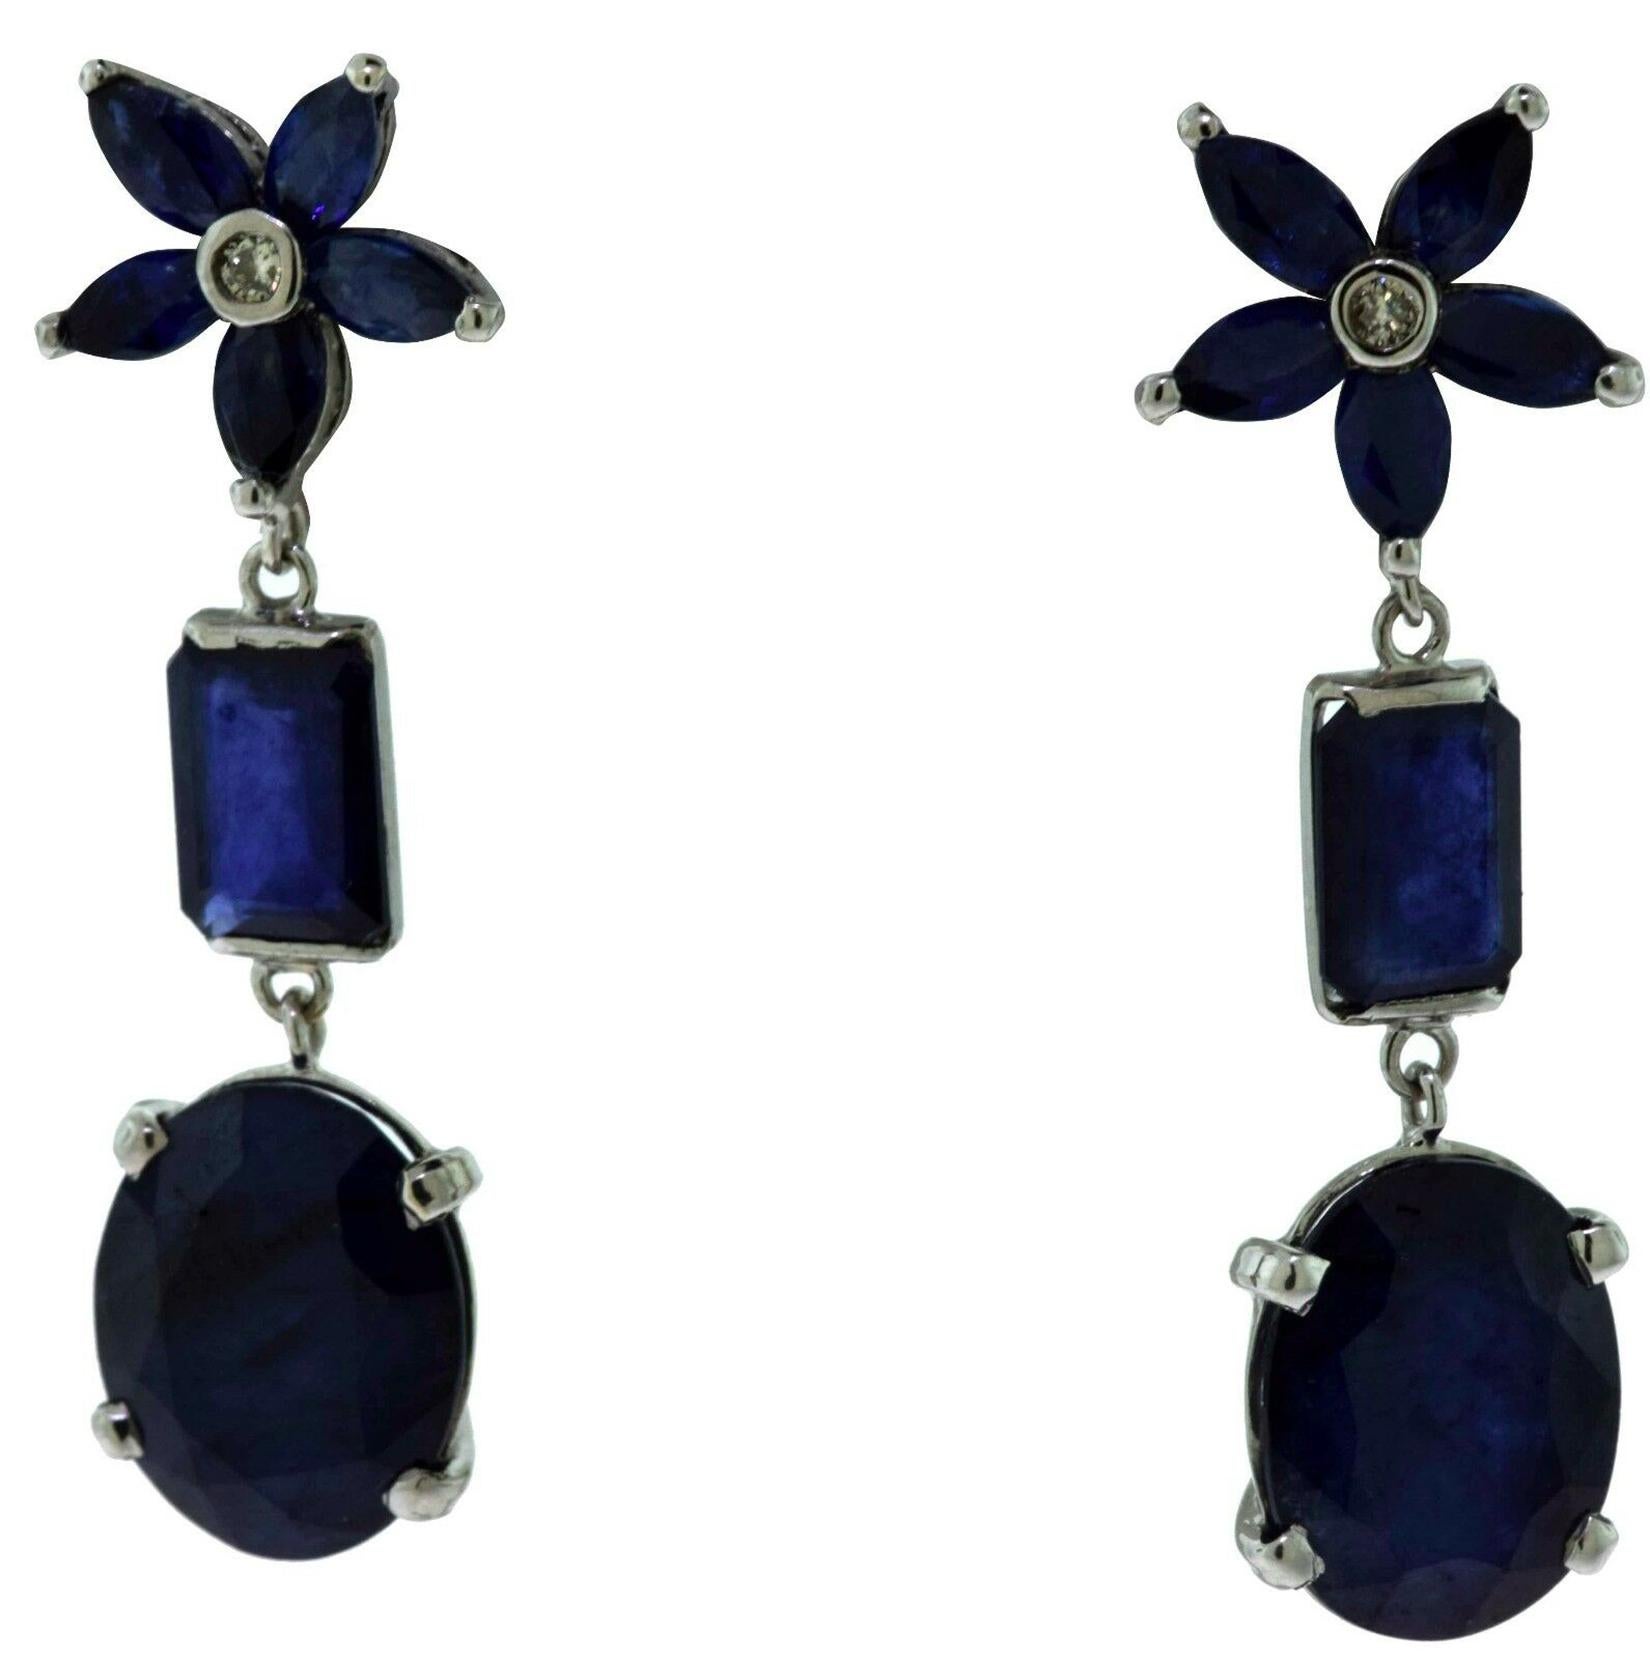 Brilliance Jewels, Miami
Questions? Call Us Anytime!
786,482,8100

Metal: White Gold

Metal Purity: 14k

Stones: 1 Round Brilliant Cut Diamond

               Natural Dark Blue Sapphire

Approx. Sapphire Dimensions:

                   Bottom: 12.09